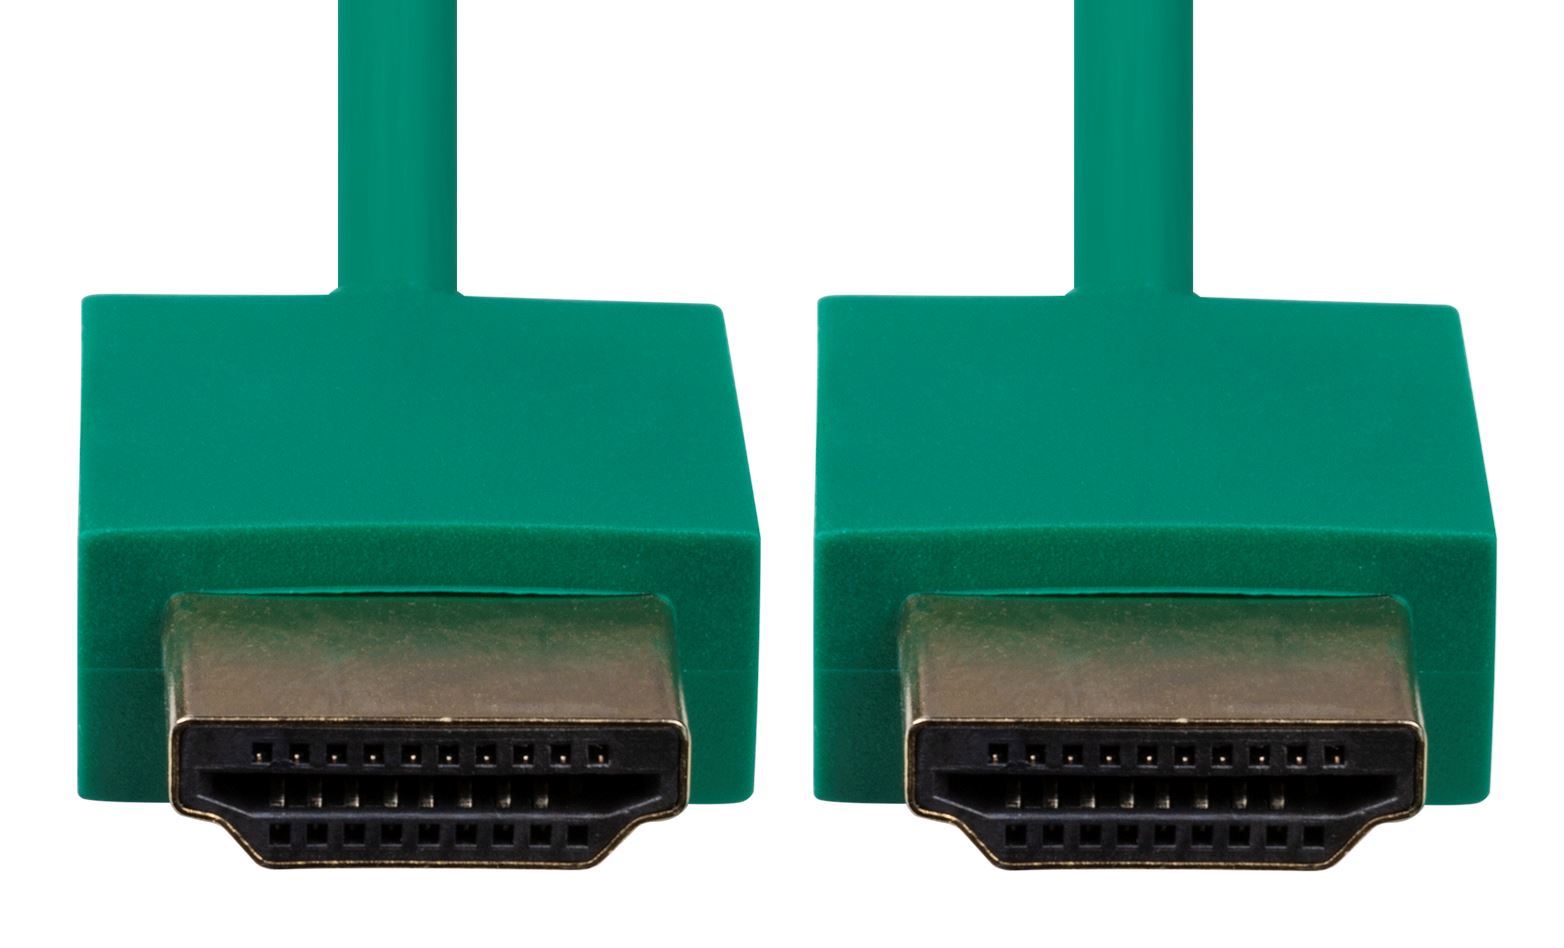 DYNAMIX_2M_HDMI_GREEN_Nano_High_Speed_With_Ethernet_Cable._Designed_for_UHD_Display_up_to_4K2K@60Hz._Slimline_Robust_Cable._Supports_CEC_2.0,_3D,_&_ARC._Supports_Up_to_32_Audio_Channels. 761